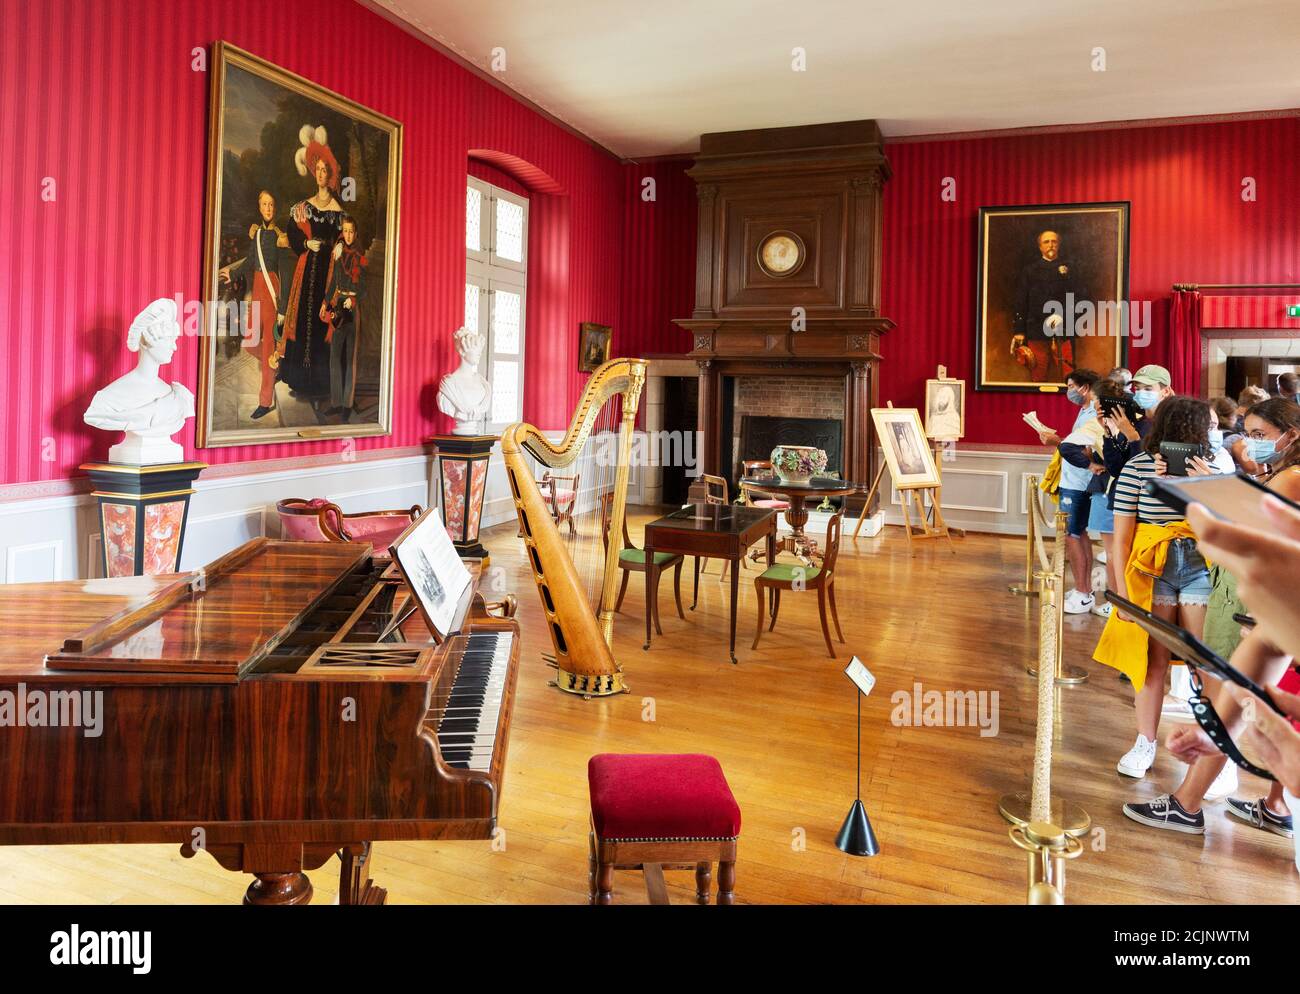 Tourists & visitors inside the Chateau D'Amboise, in the ornate Orleans Music room with musical instruments; Amboise France Europe Stock Photo